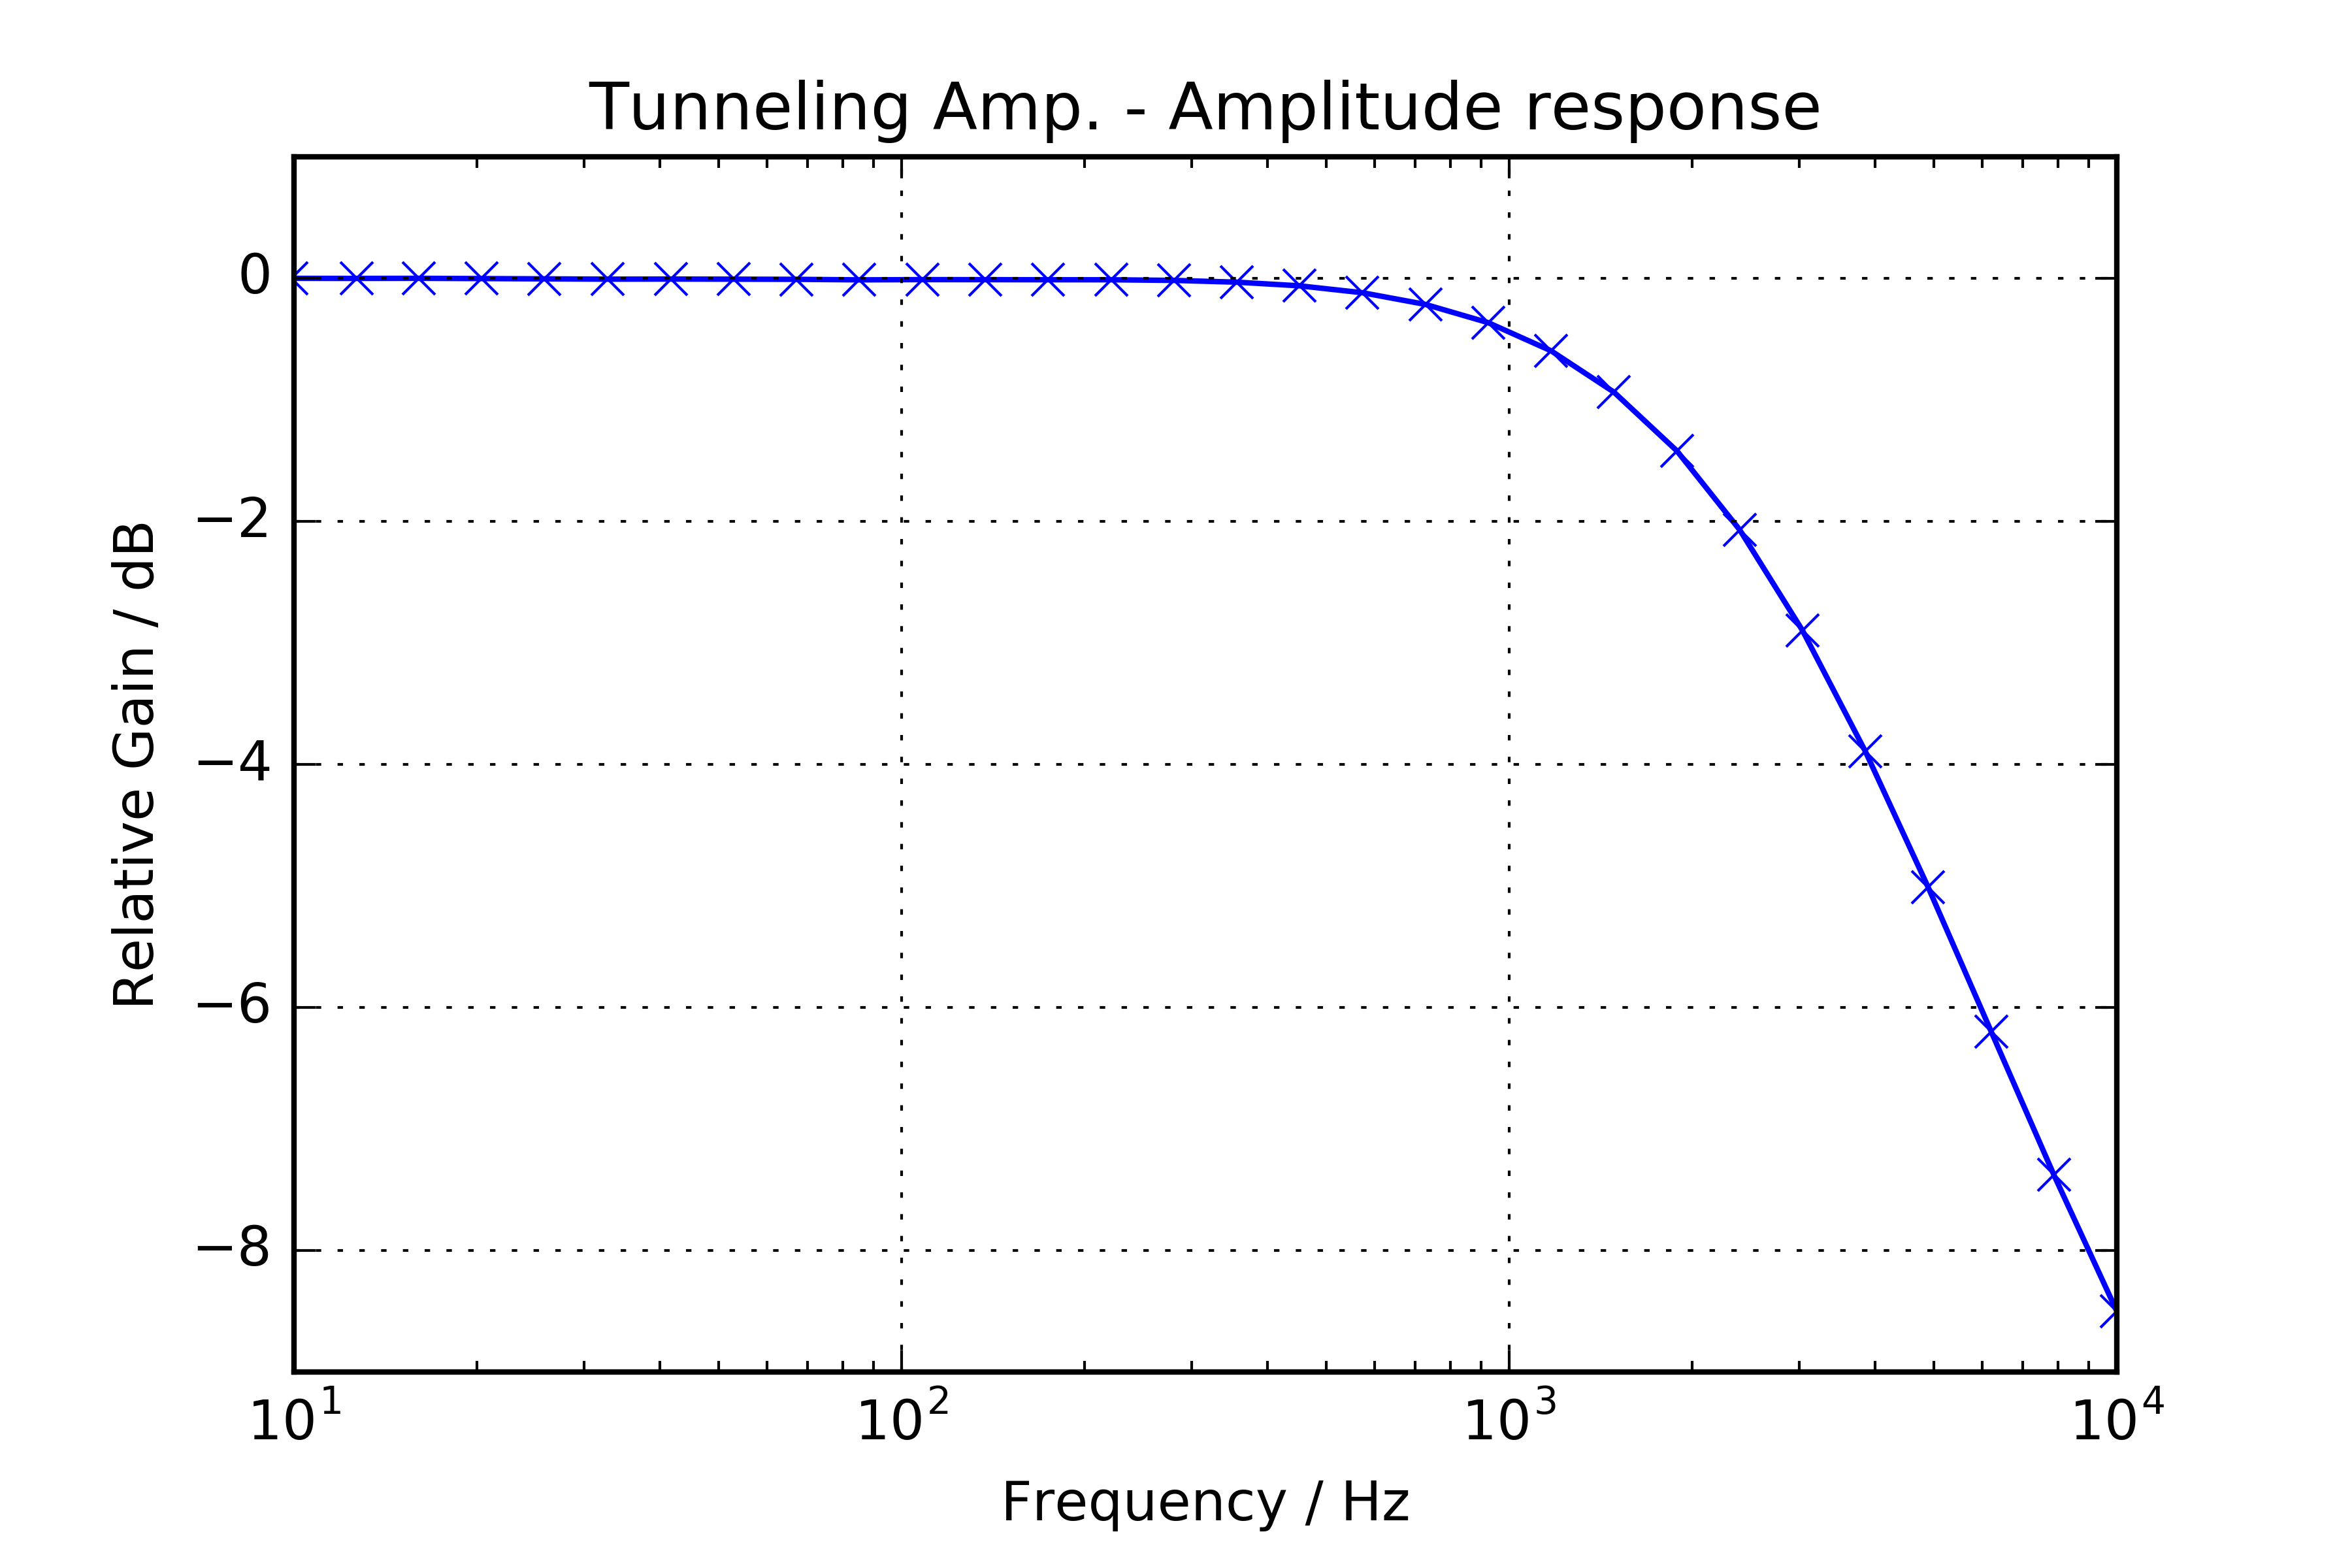 tunneling_amp-freq_response.png